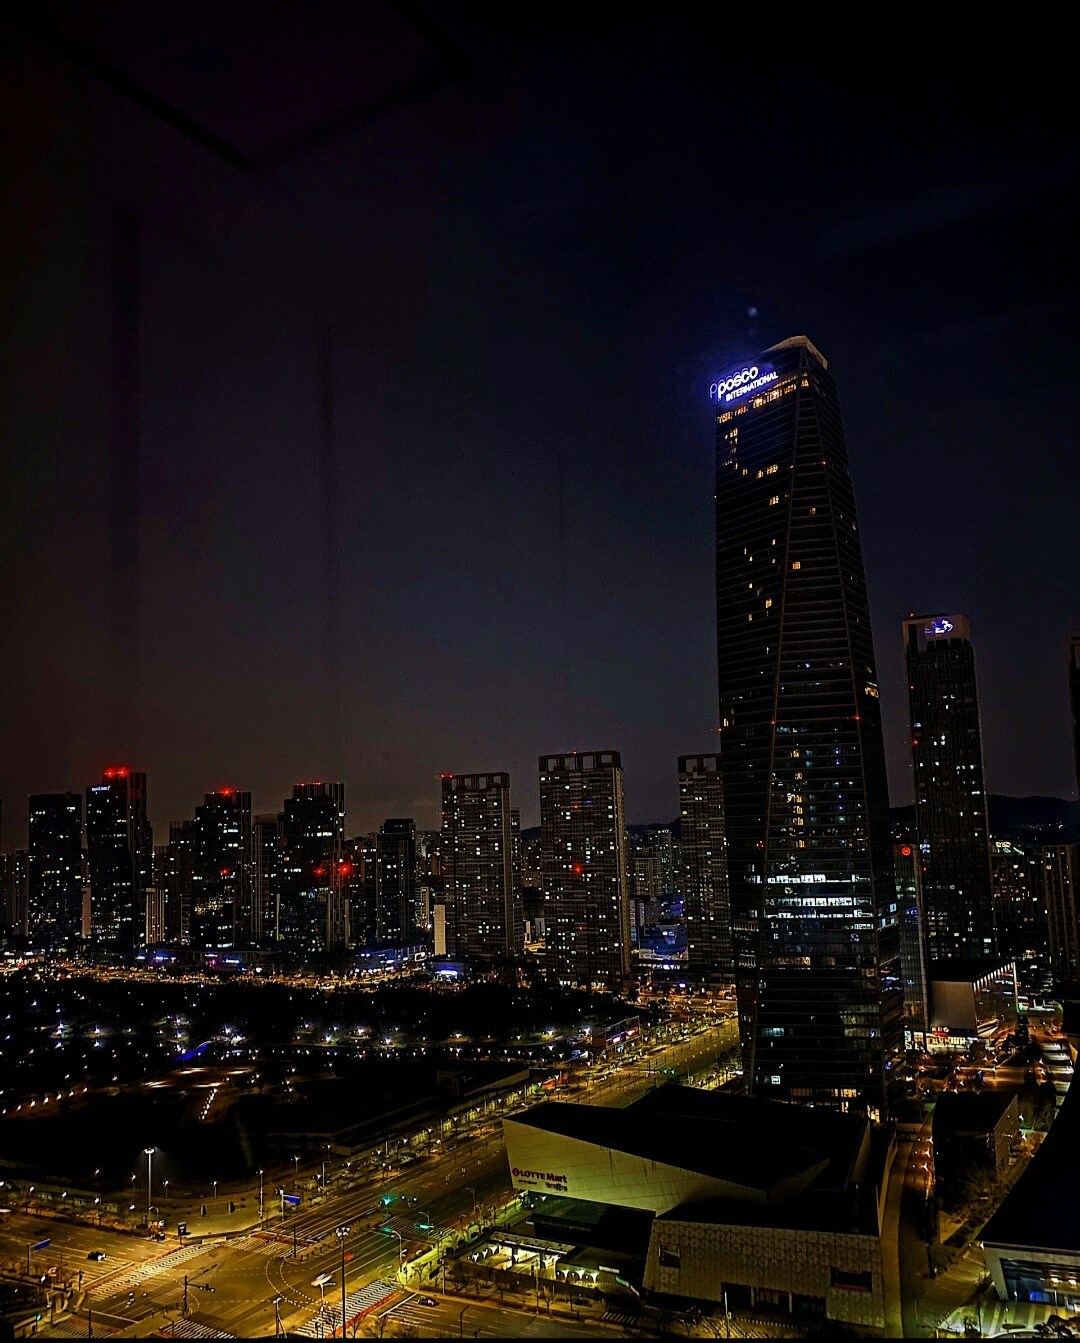 # 02, Songdo City View on High Floor, Songdo, Central park,